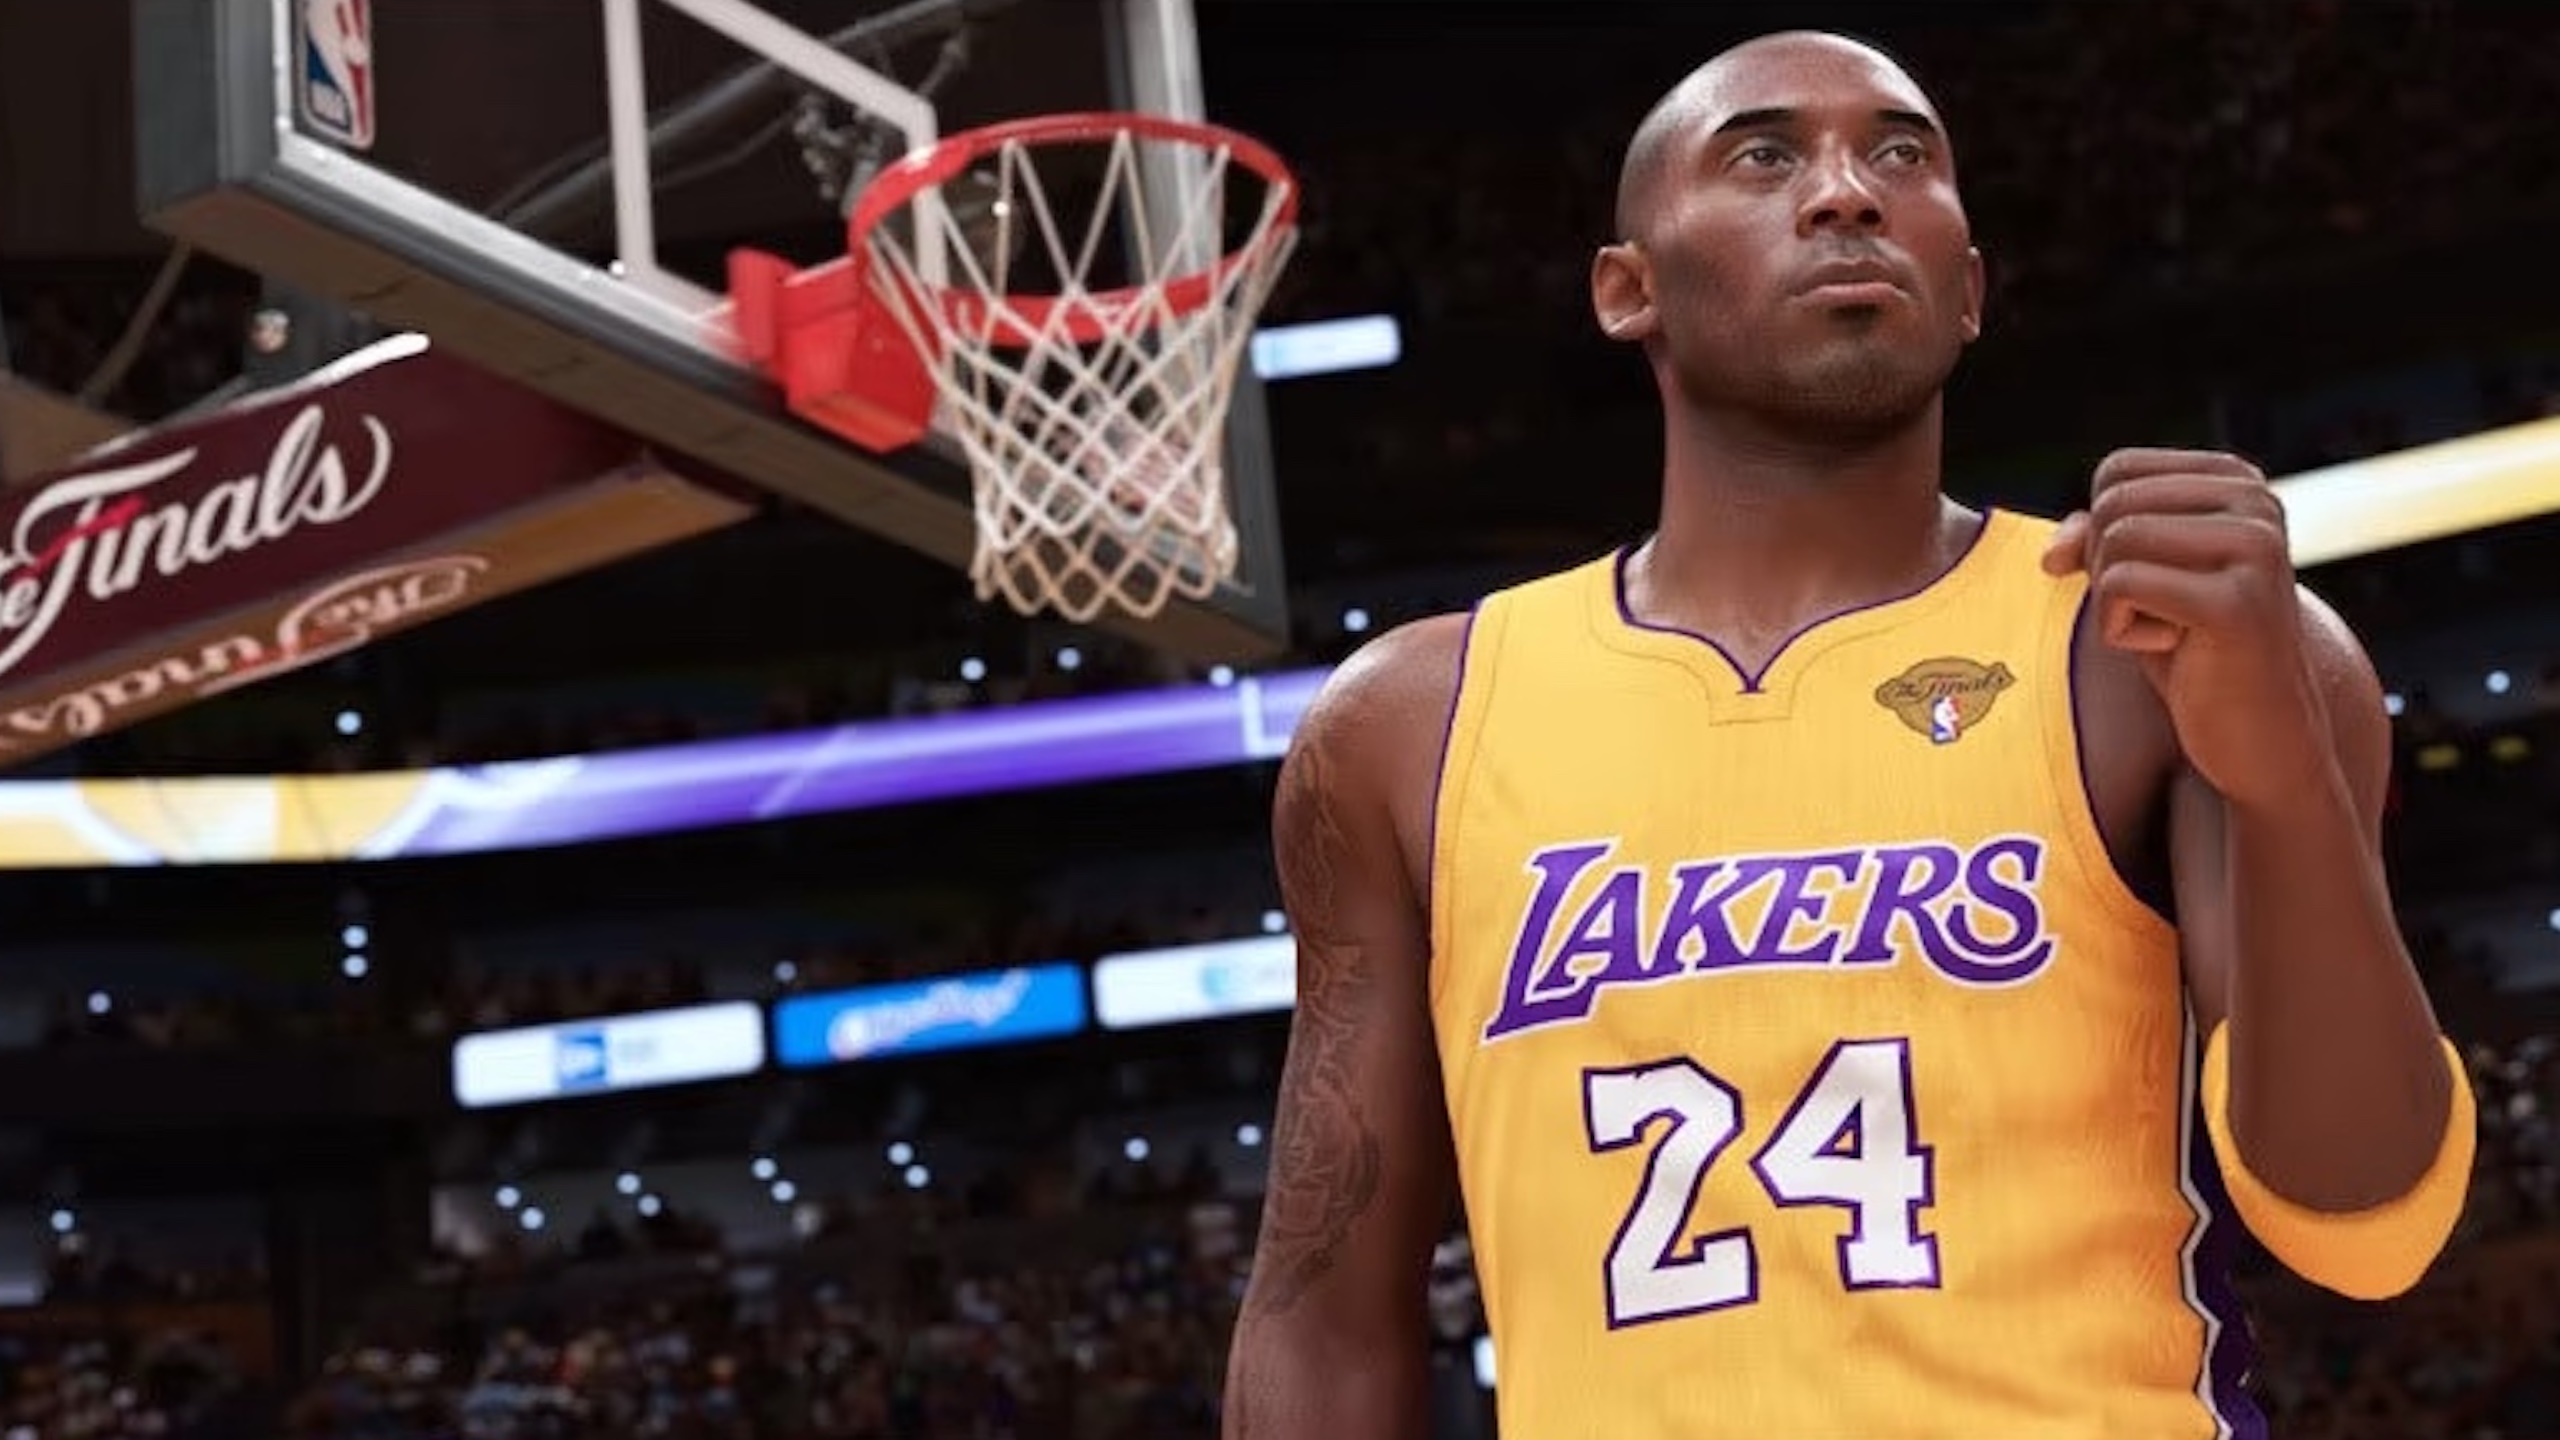 A digital representation of Kobe Bryant is standing under a basketball hoop, wearing his signature Lakers 24 jersey